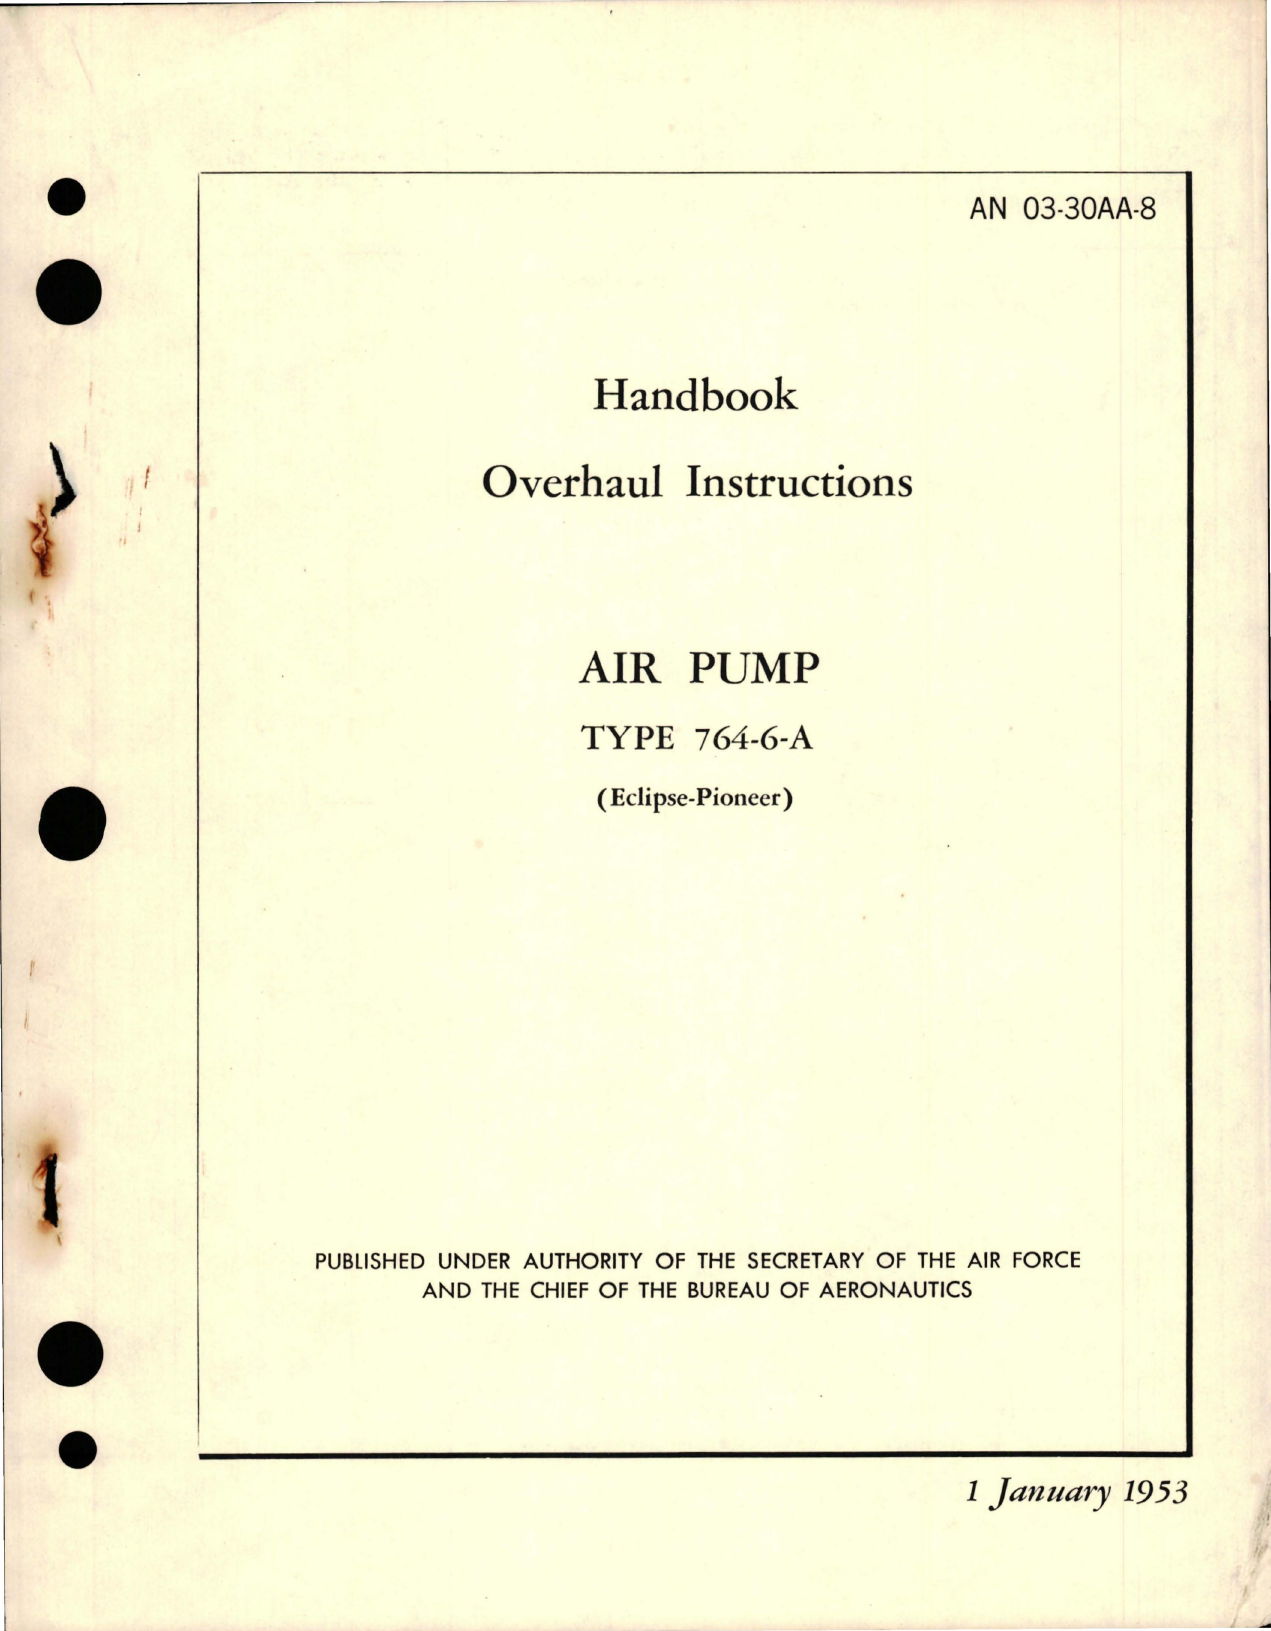 Sample page 1 from AirCorps Library document: Overhaul Instructions for Air Pump - Type 764-6-A